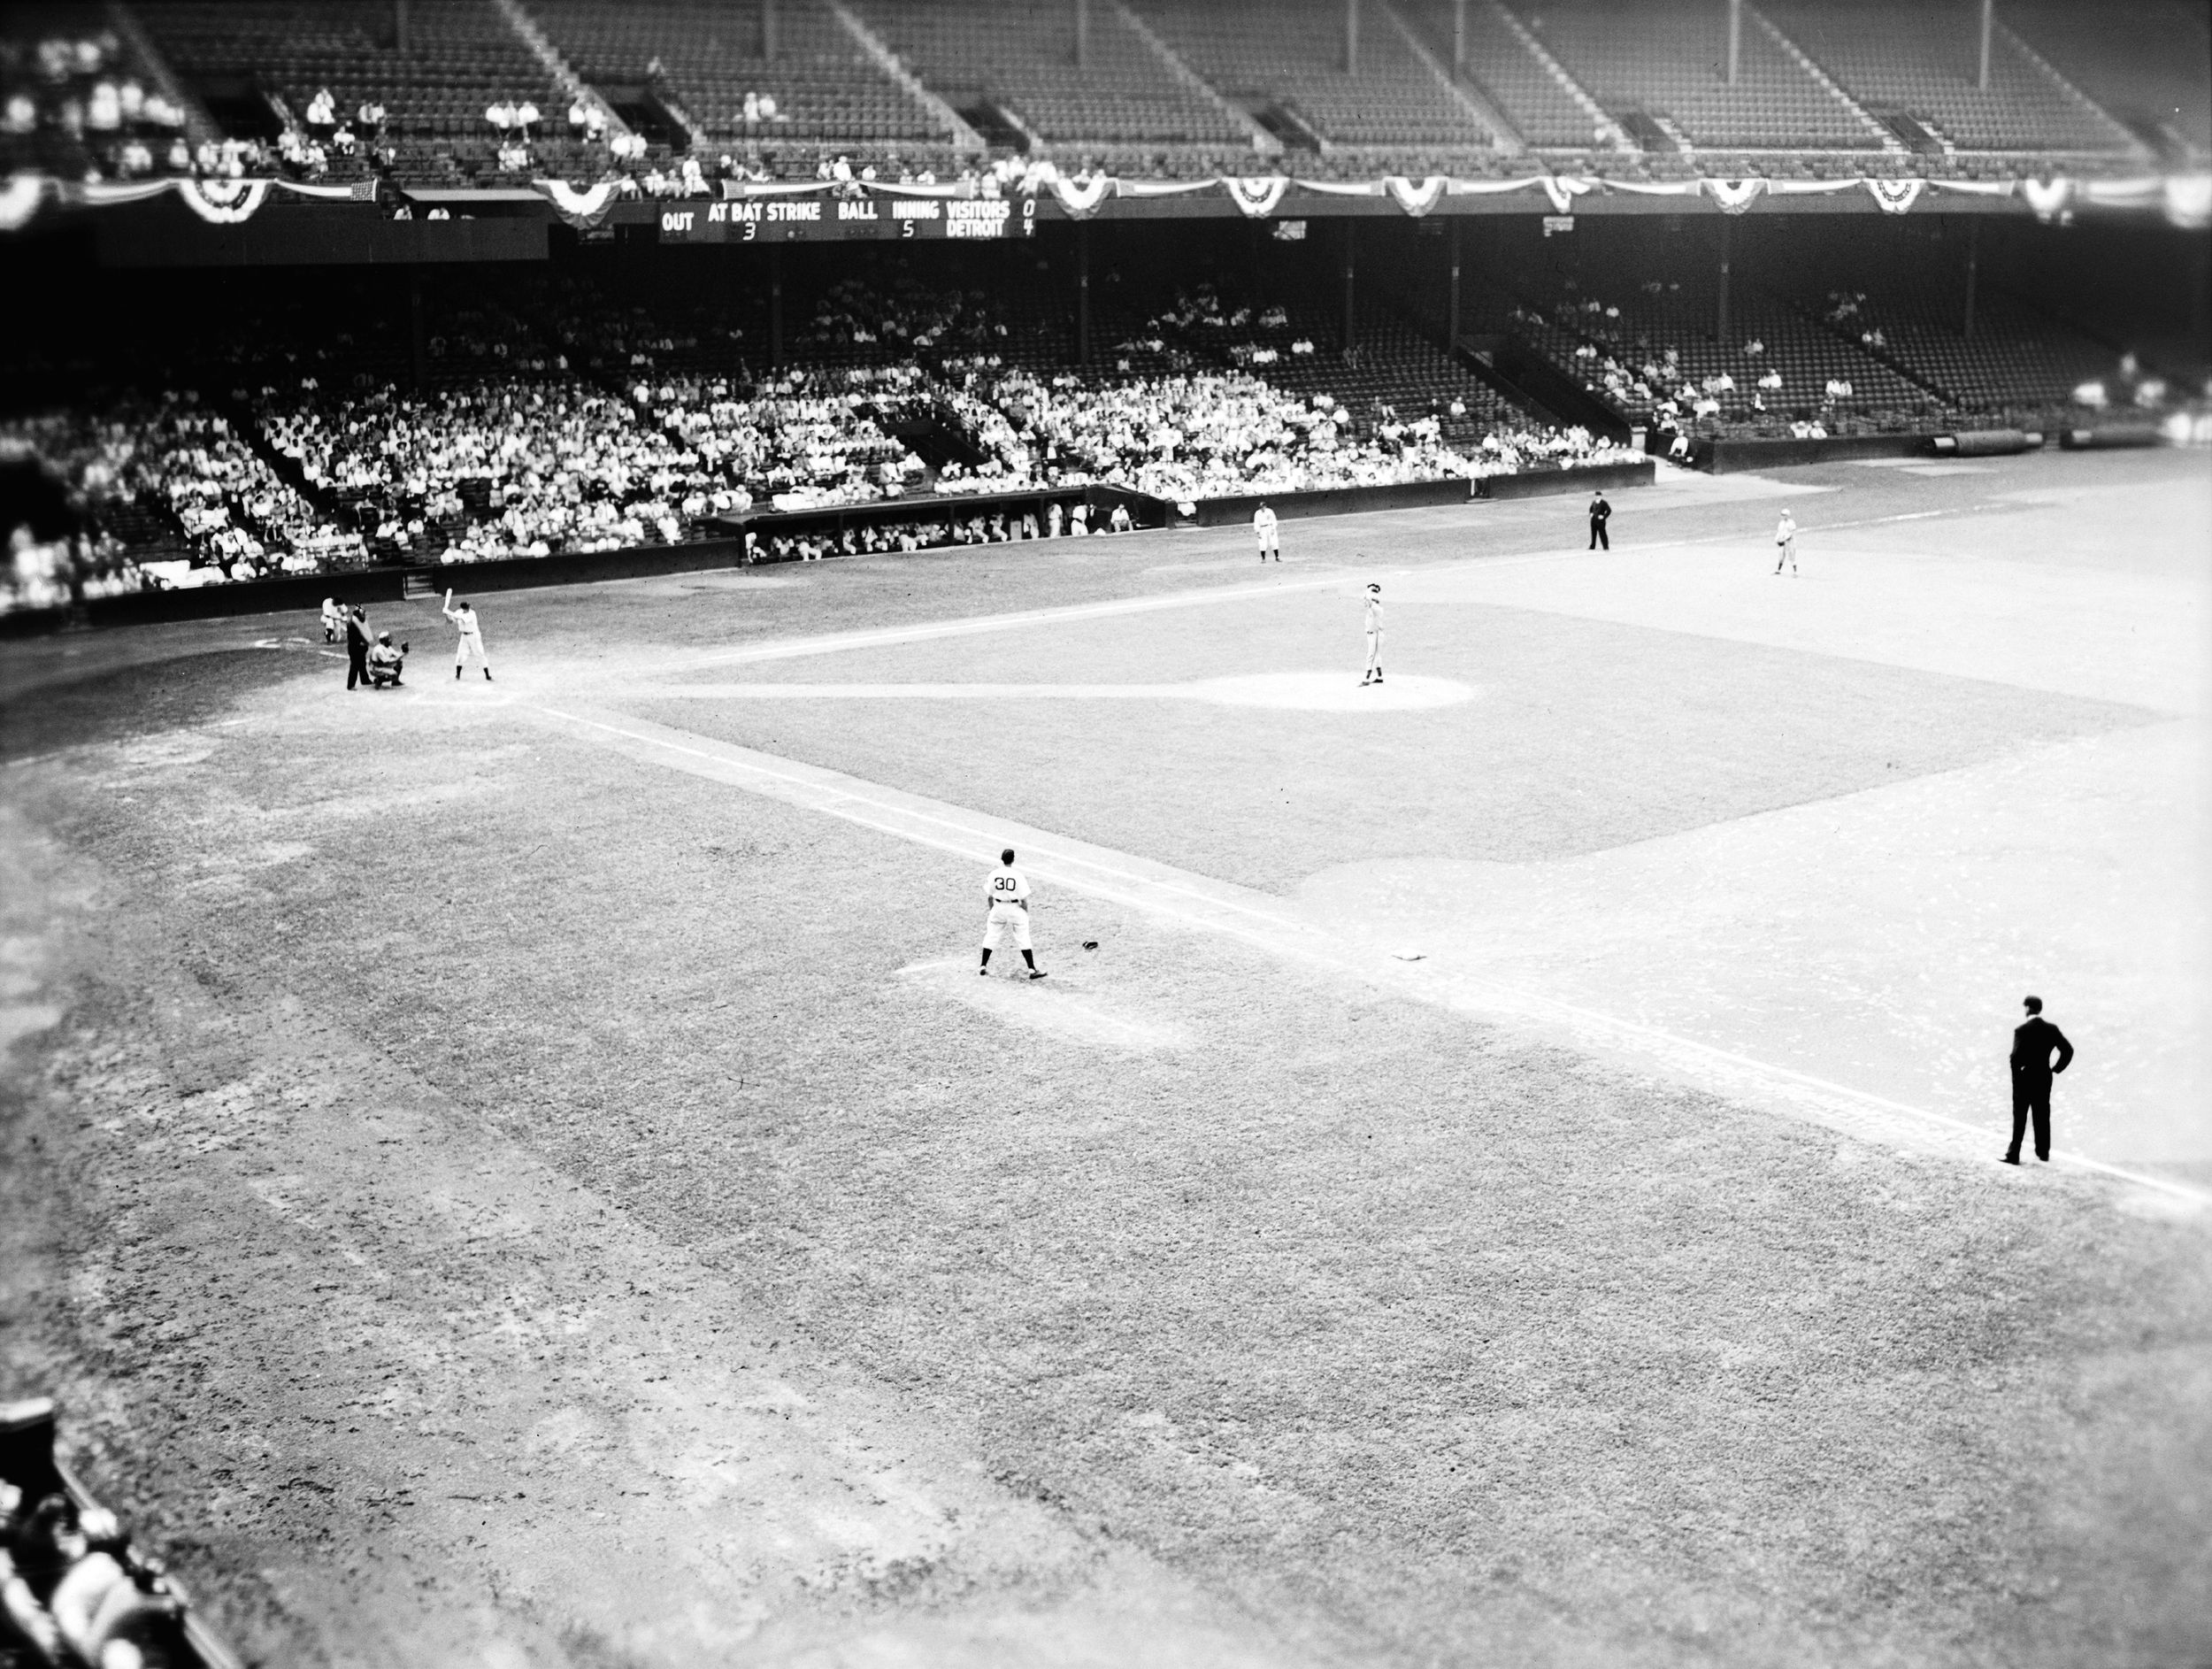 Fans crowd the stadium for a game between the Detroit Tigers and the Cleveland Indians in 1942. President Franklin D. Roosevelt asserted that continuing to play major league baseball was essential to the national morale.